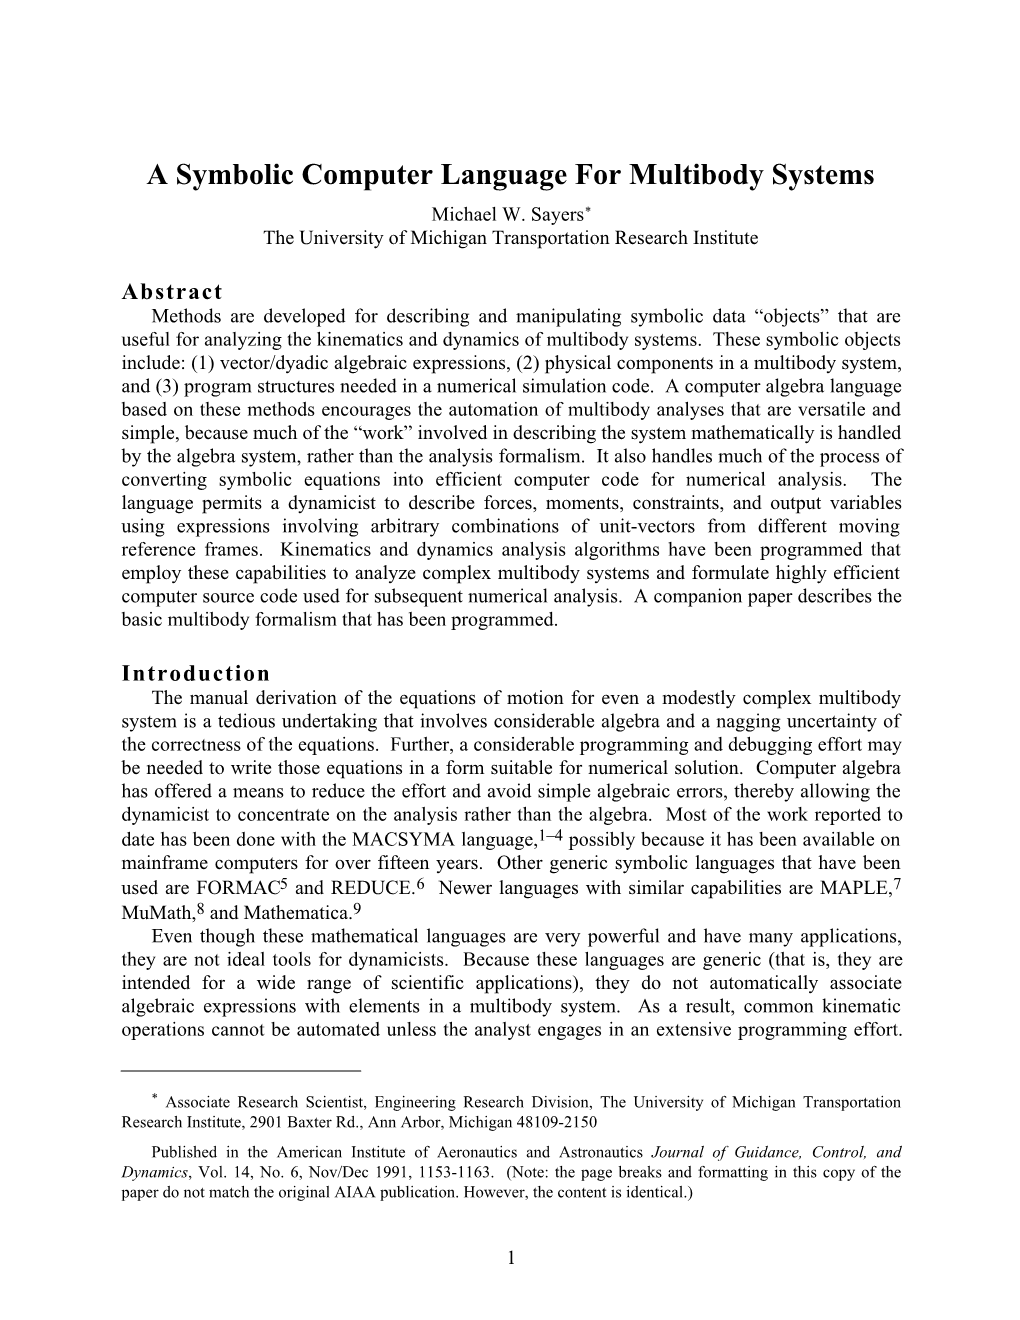 A Symbolic Computer Language for Multibody Systems Michael W